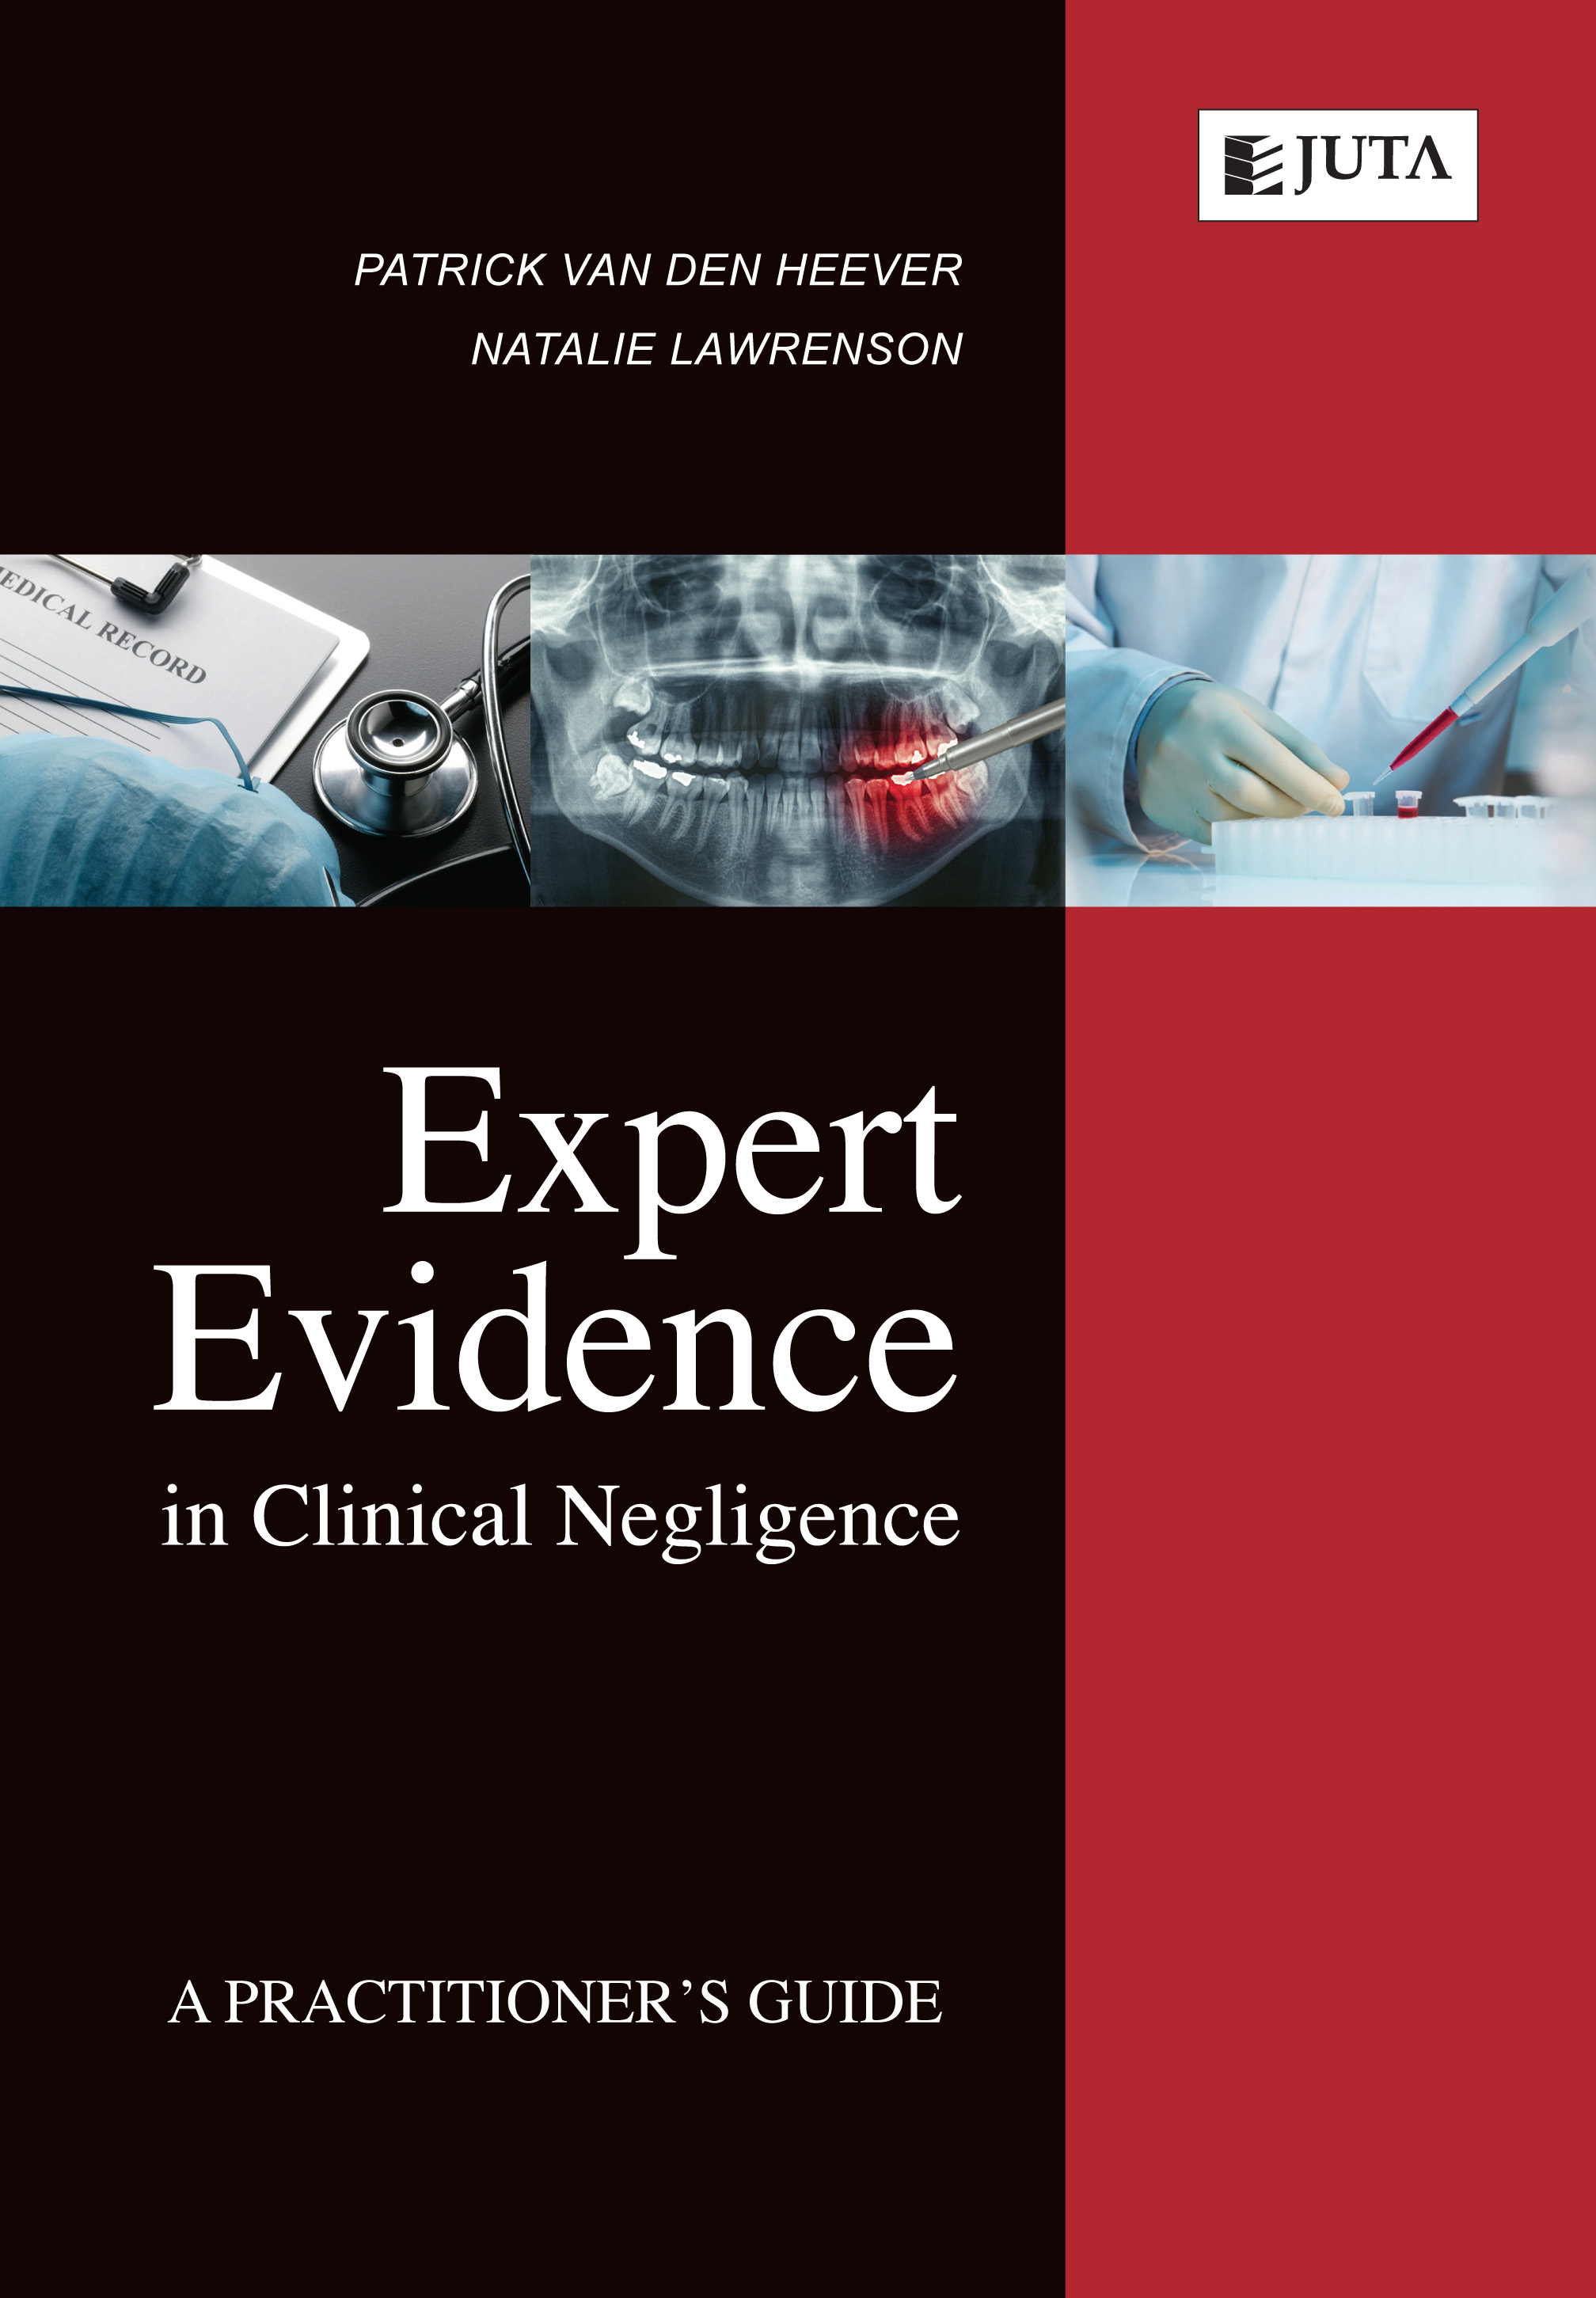 Expert Evidence in Clinical Negligence: A Practitioner's Guide